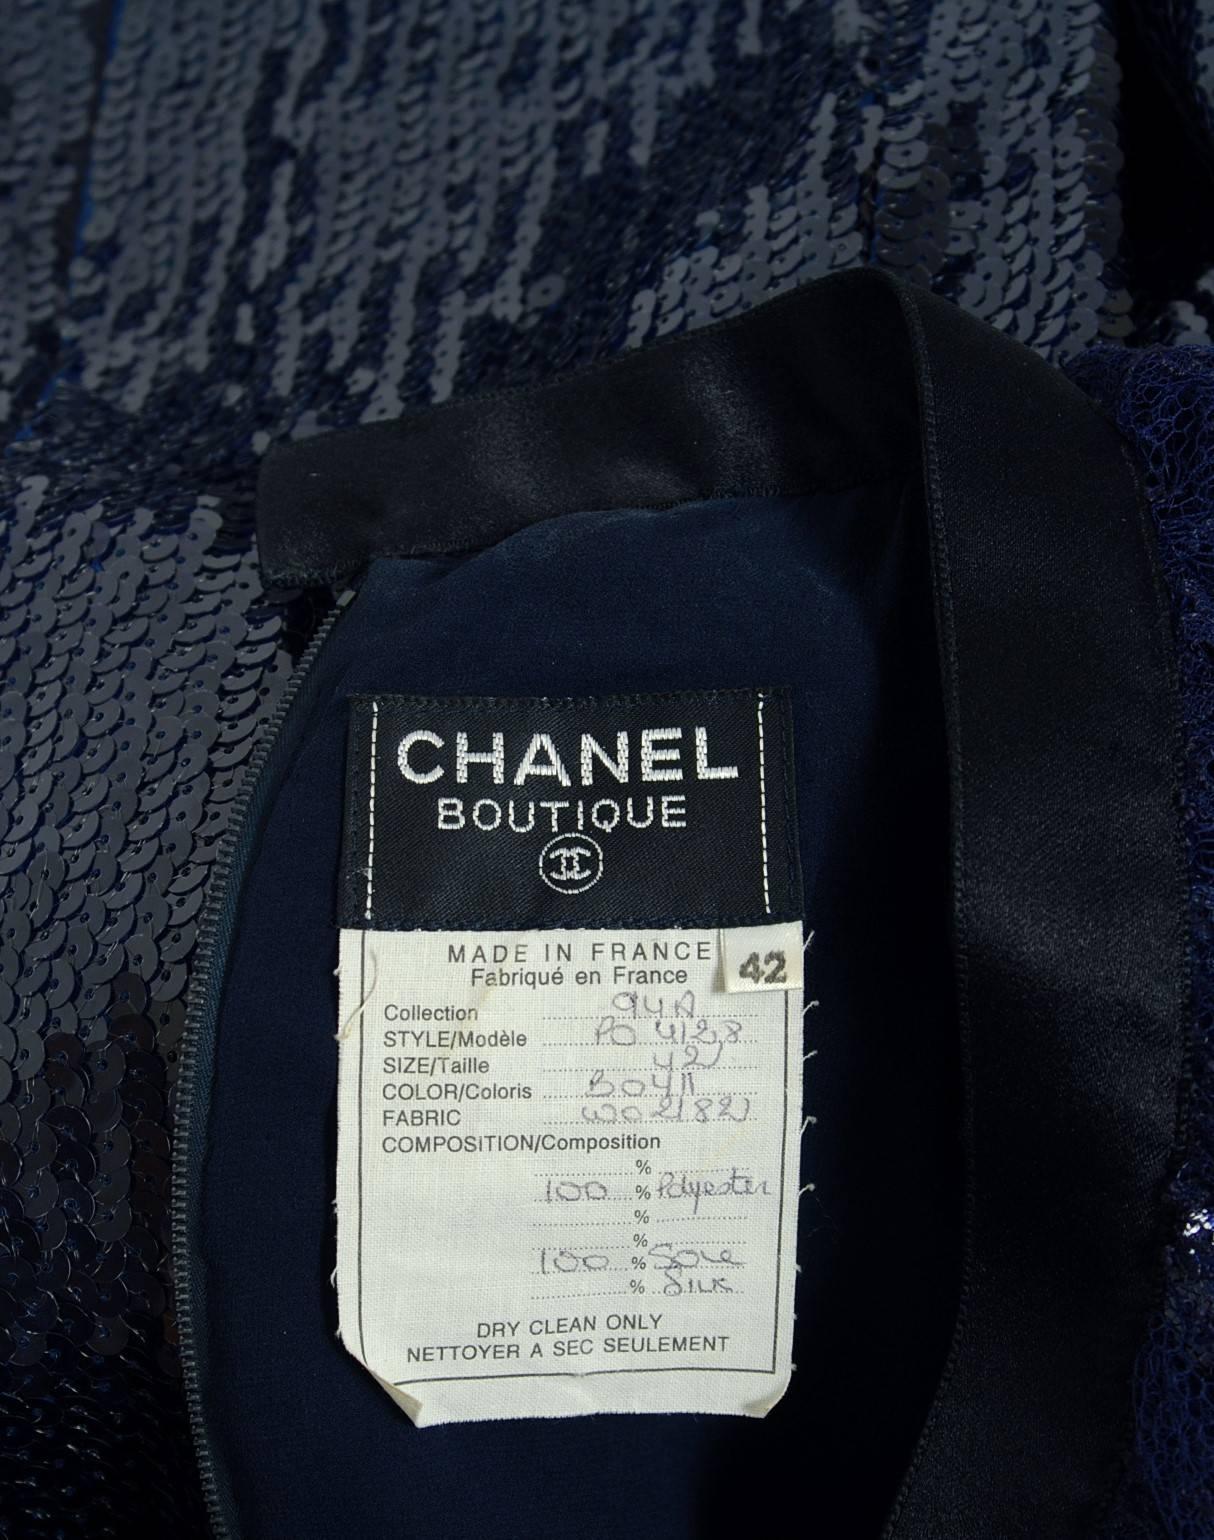 1987 Chanel Runway Navy-Blue Sequin Satin & Chantilly-Lace Cocktail Mini Dress 2